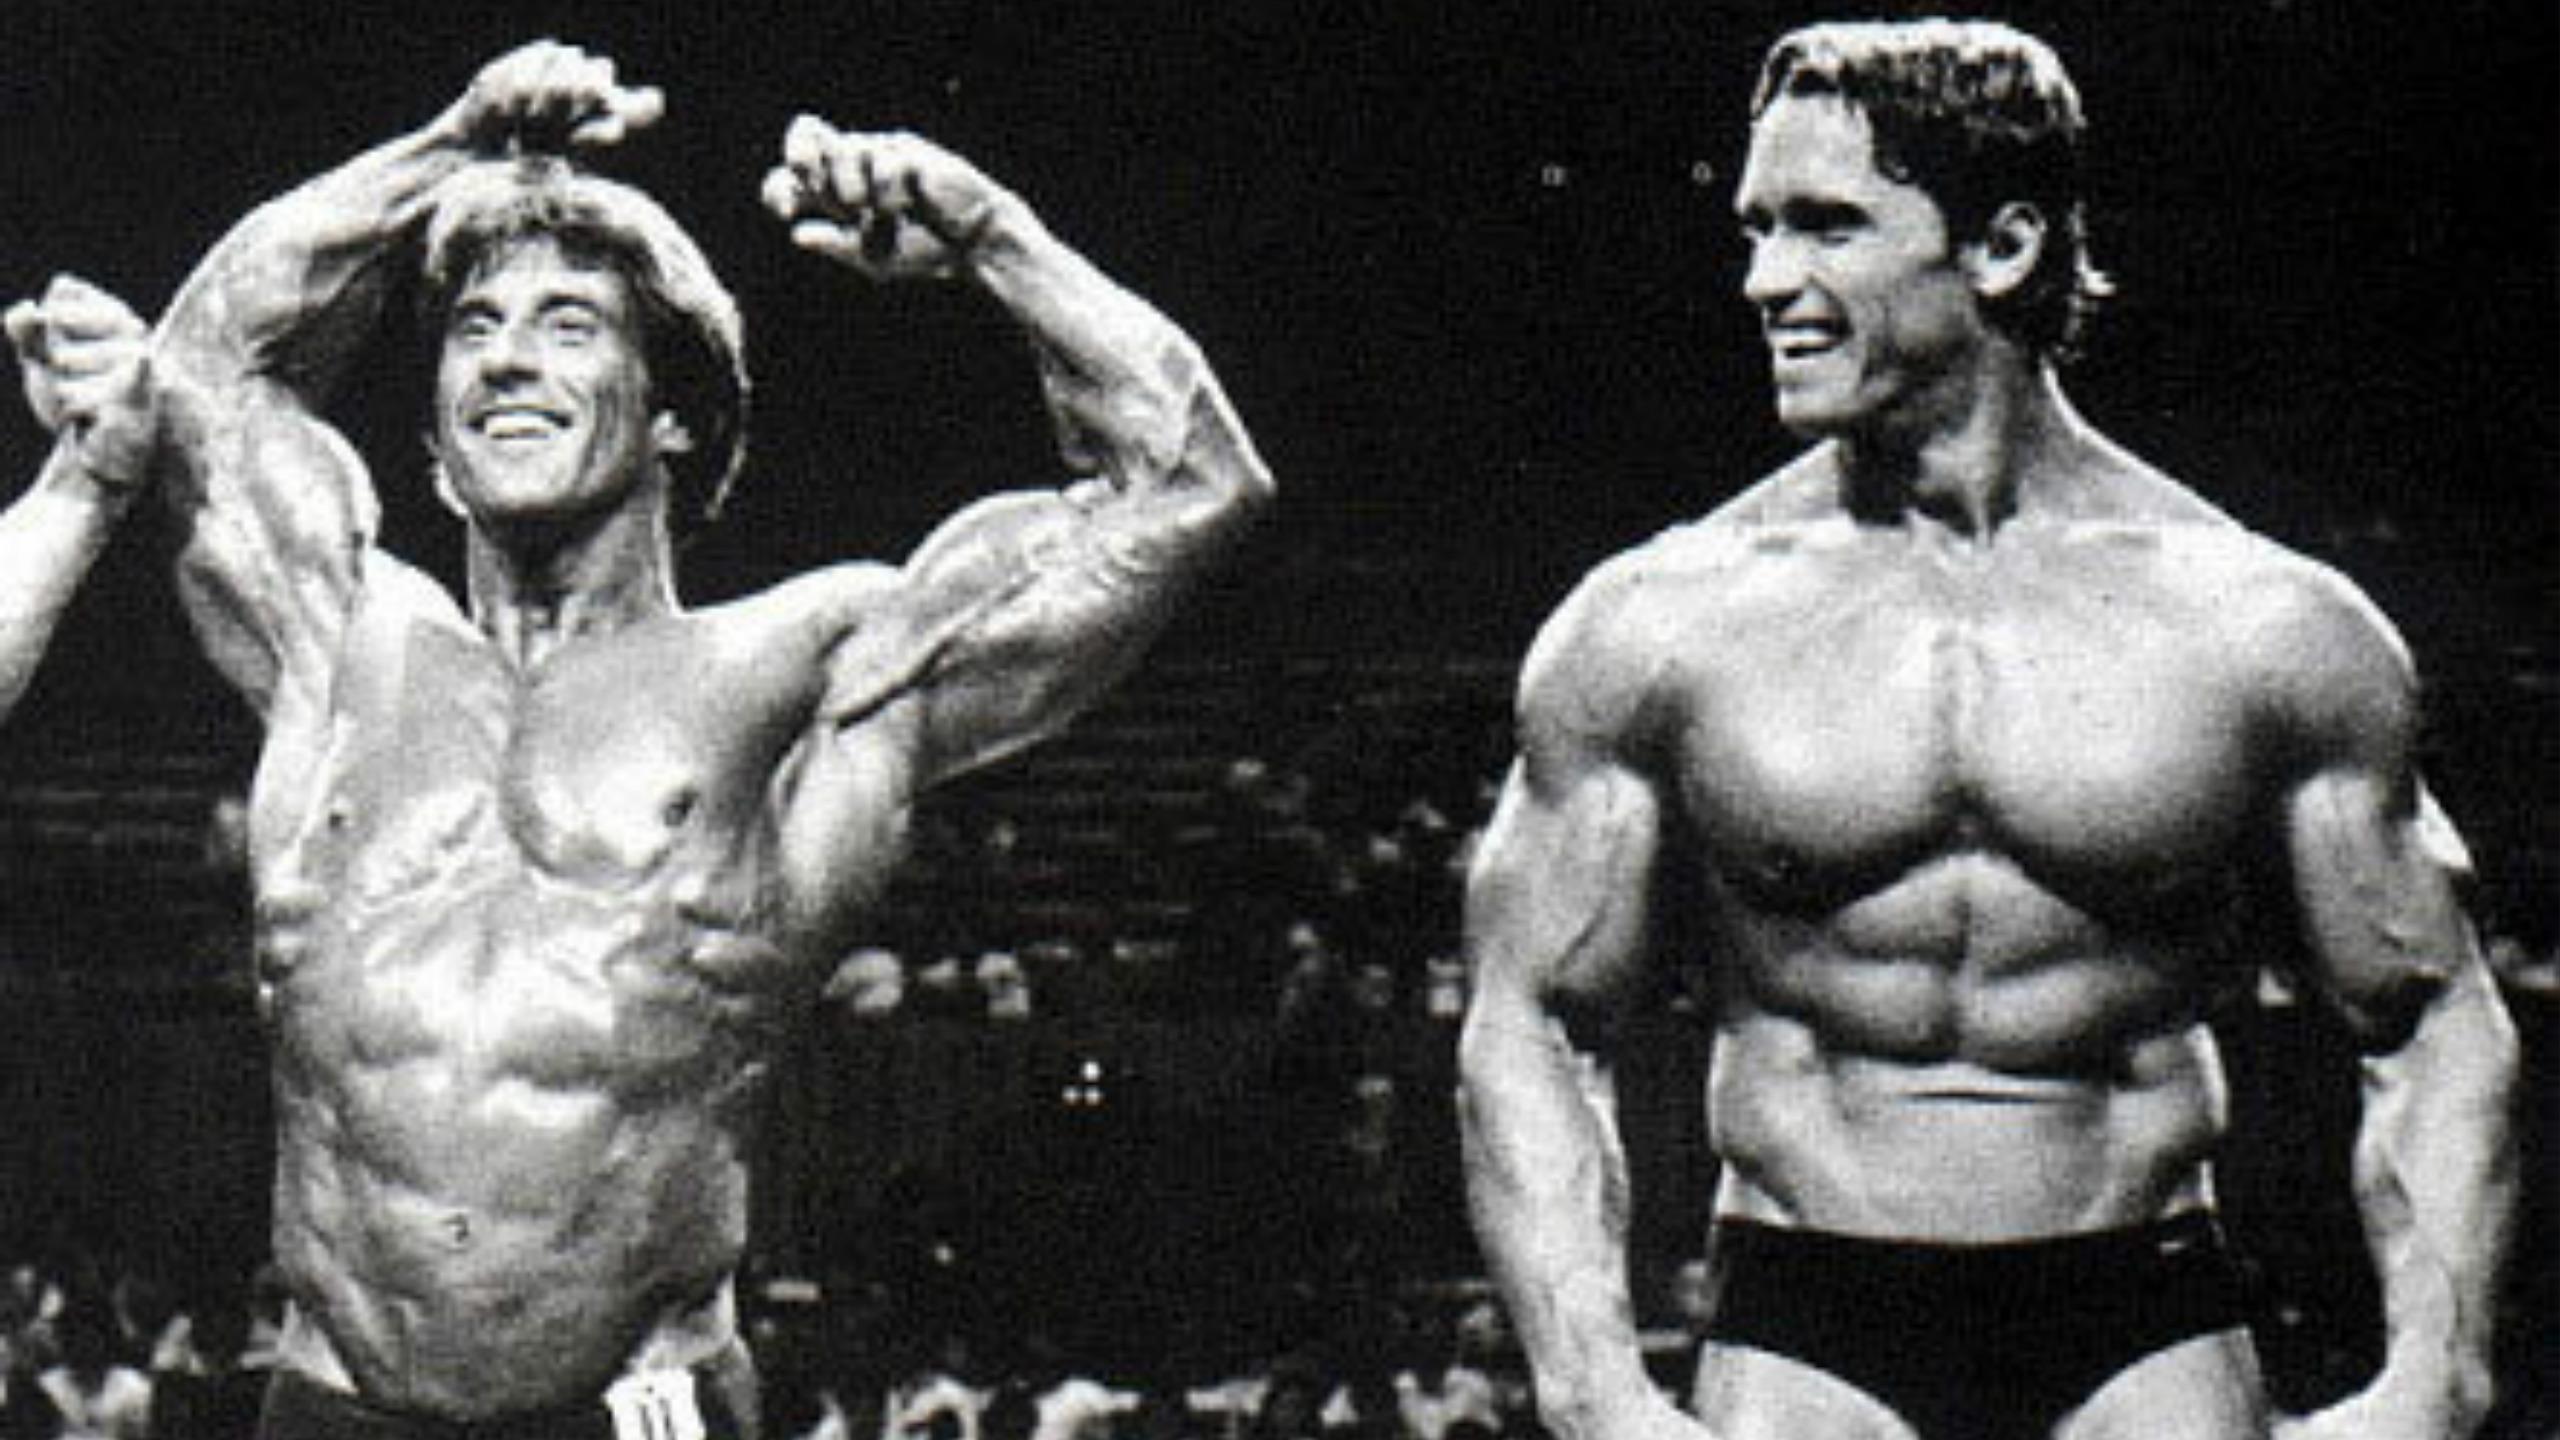 The Legendary 13: Part 1 - Muscle & Fitness